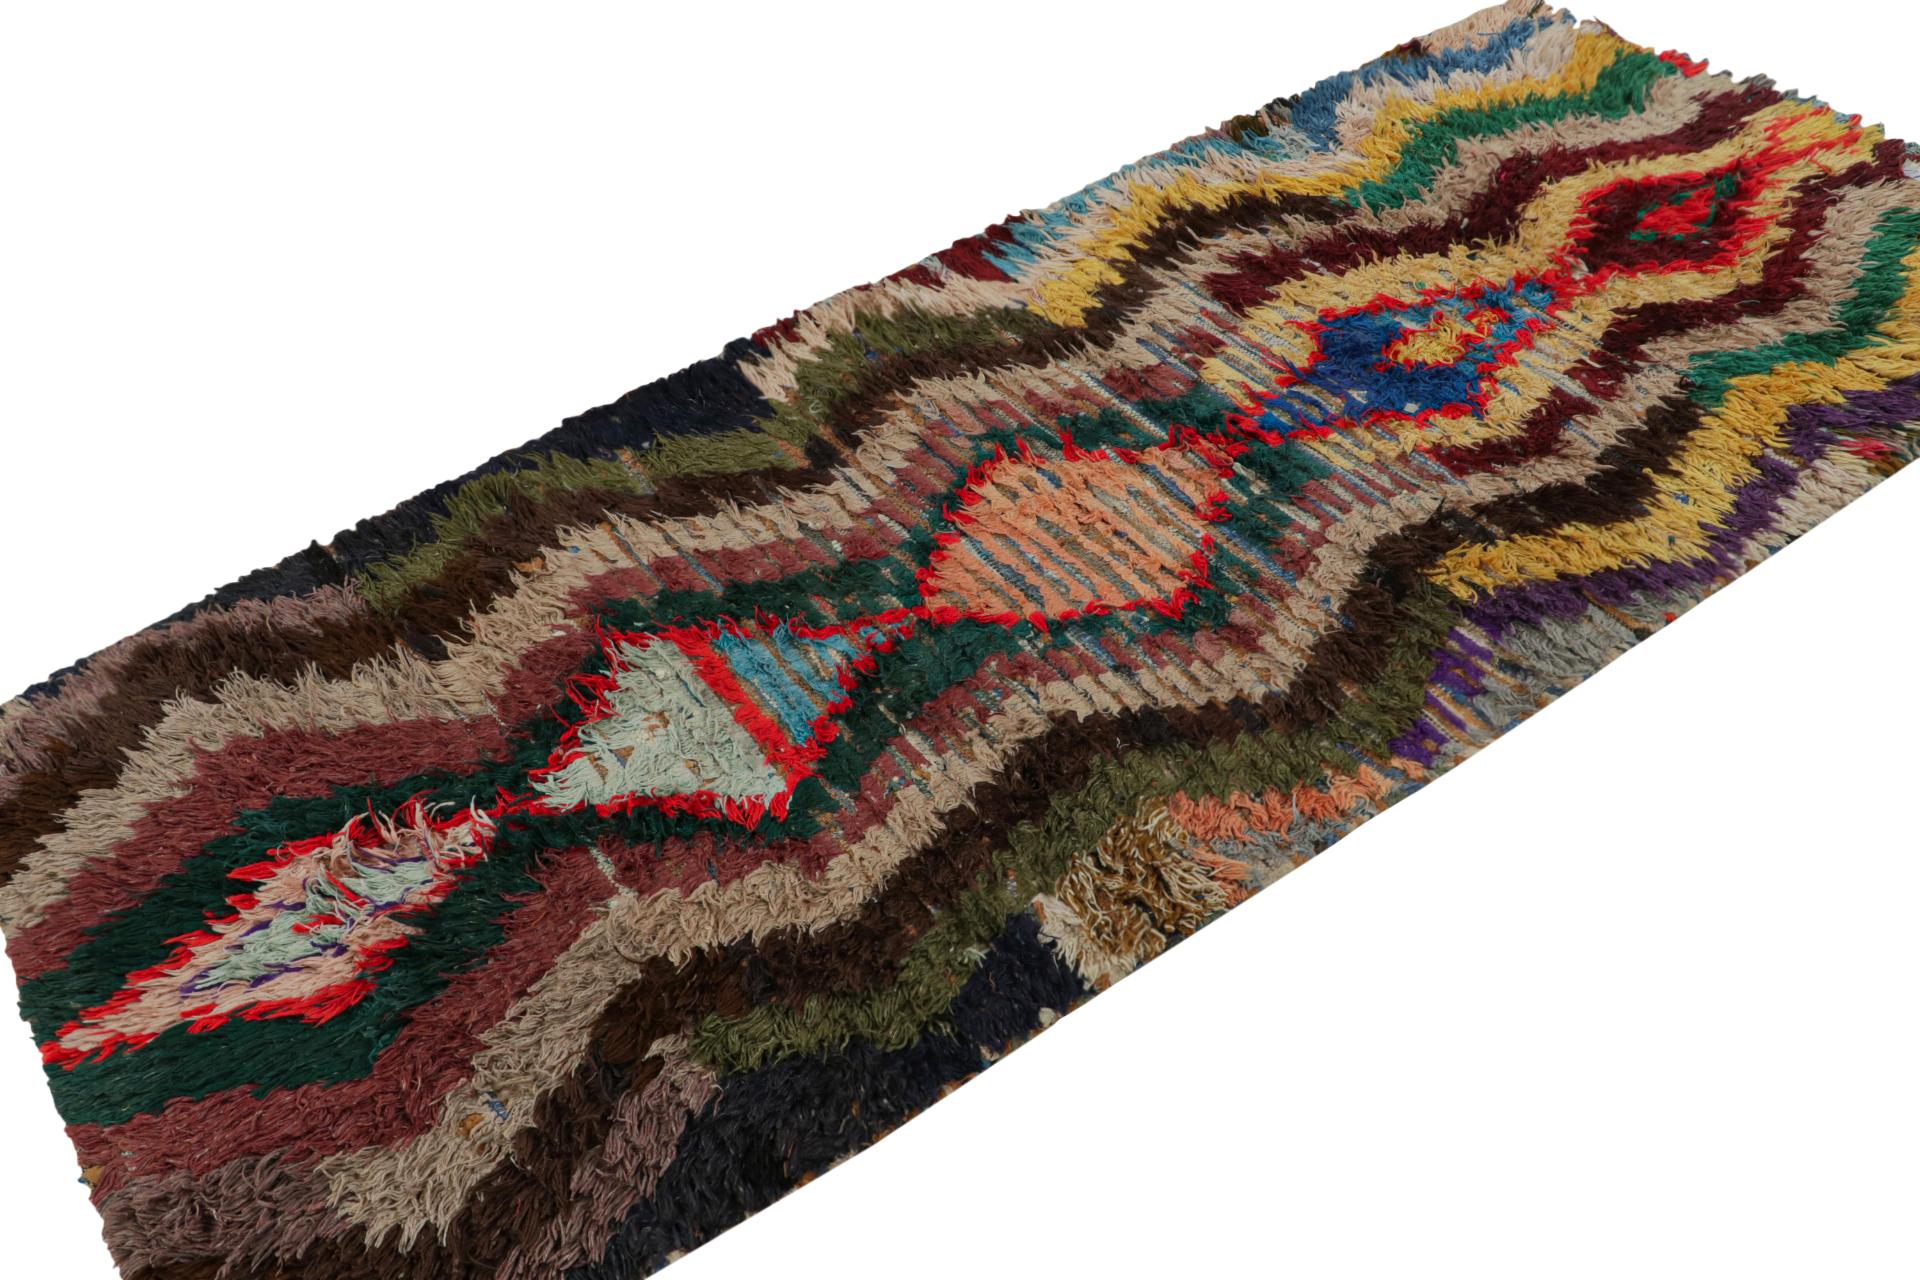 Hand-knotted in wool, circa 1950-1960, this 3x8 vintage Moroccan runner rug is believed to hail from the Azilal tribe. 

On the Design: 

This piece enjoys a lush high pile with polychromatic primitivist Berber geometric diamond patterns and